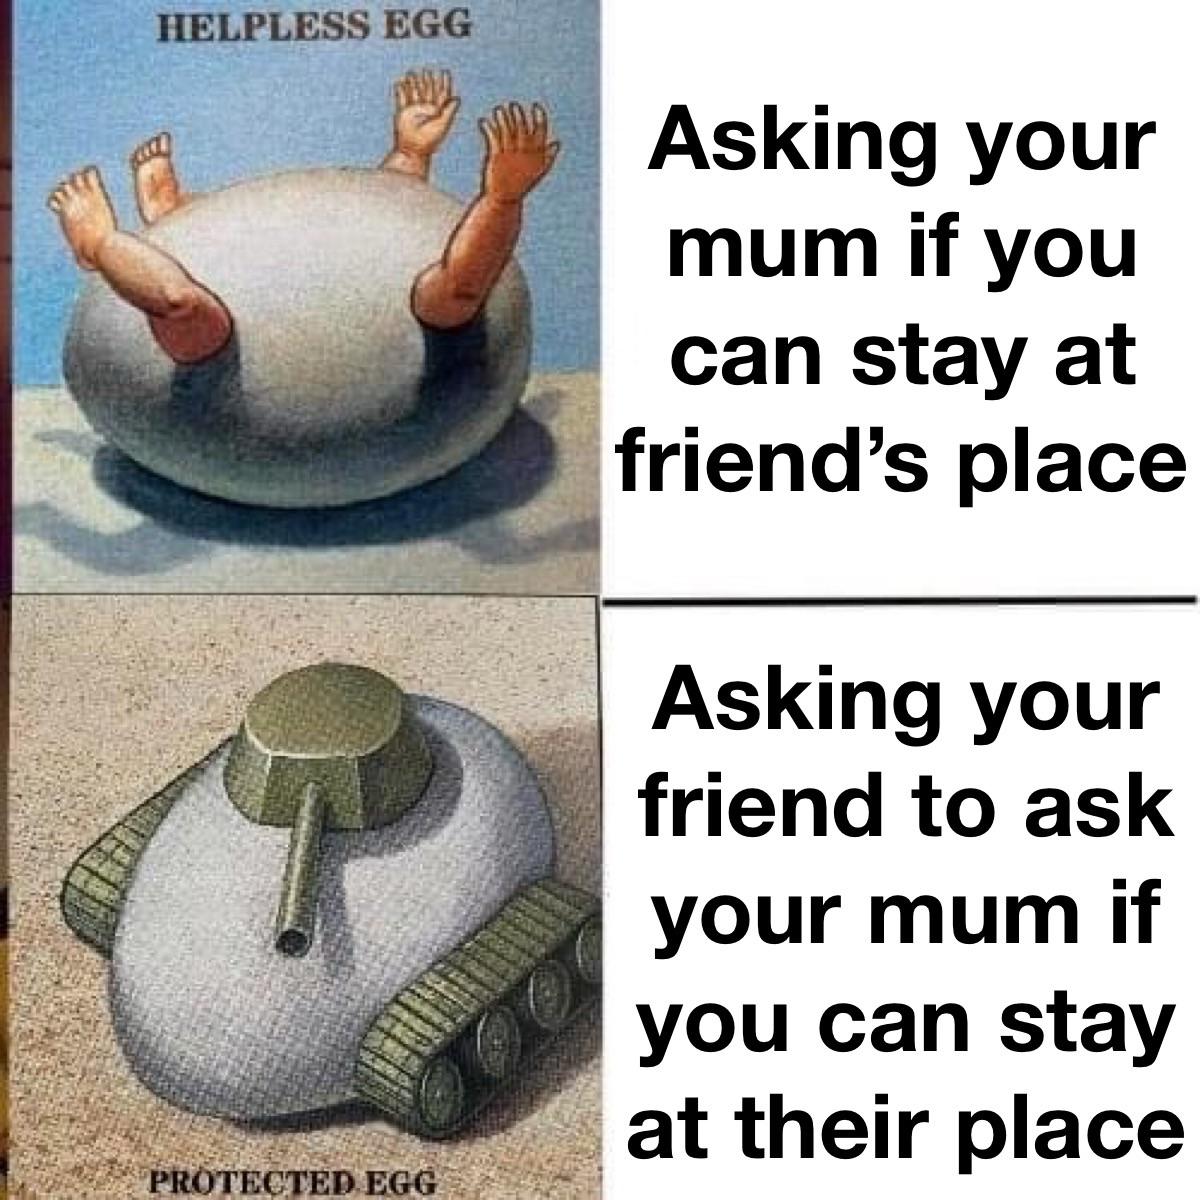 dank memes - funny memes - quotes - Helpless Egg Asking your mum if you can stay at friend's place Asking your friend to ask your mum if you can stay at their place Protected Egg